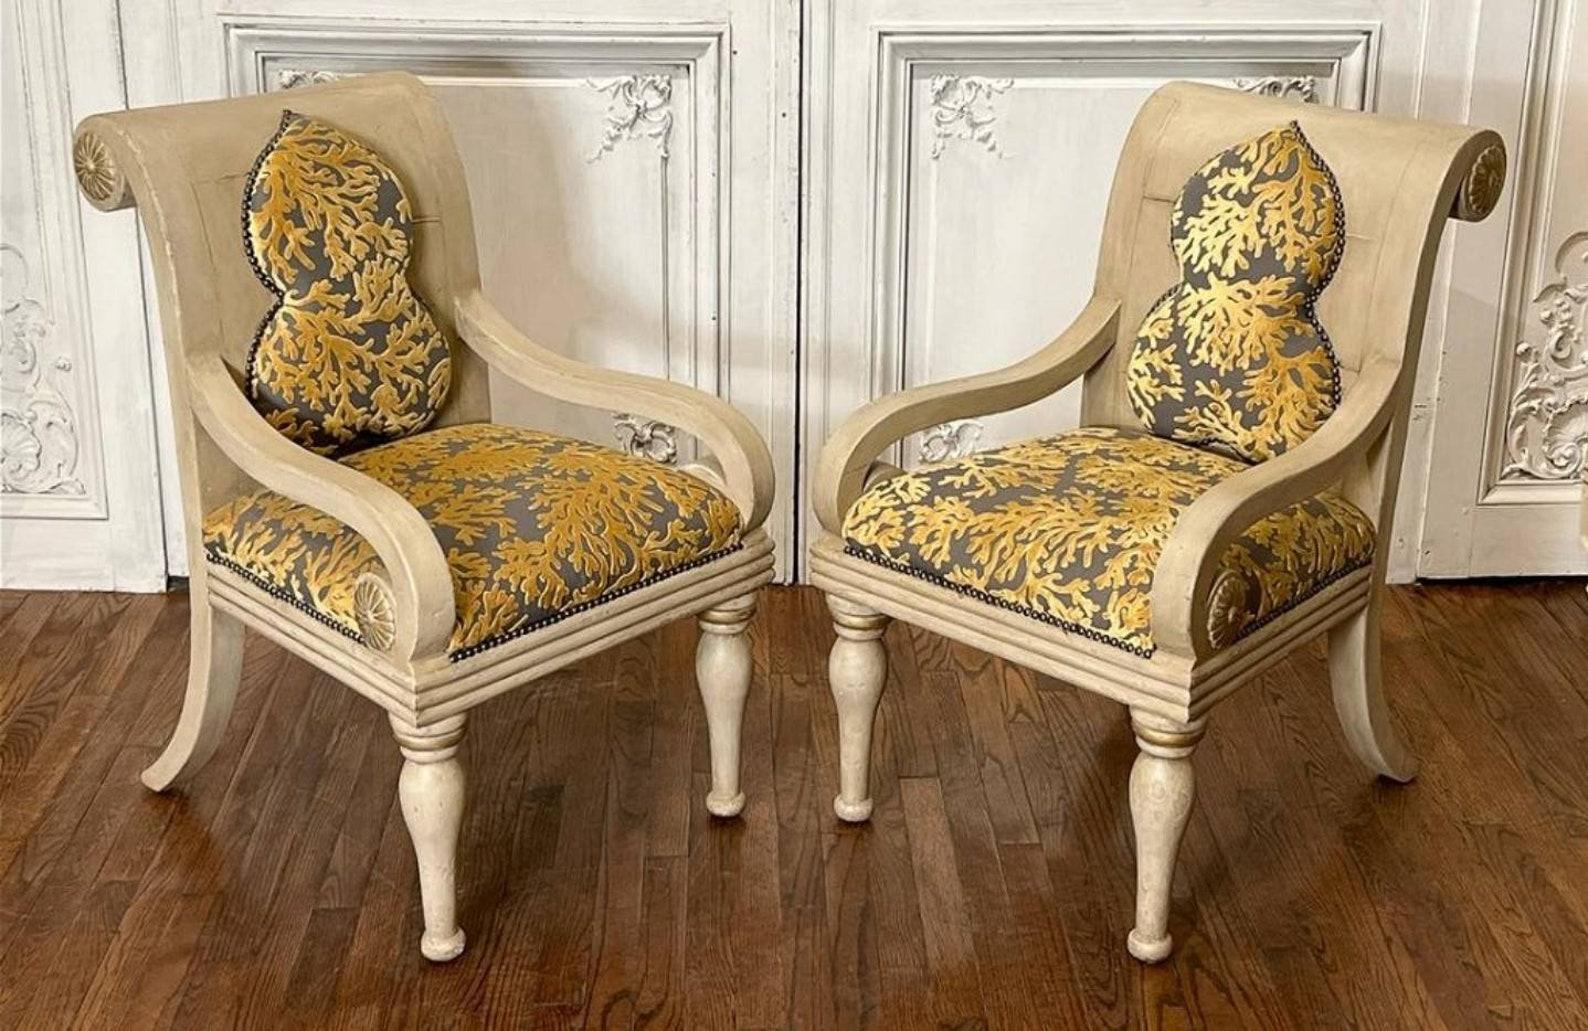 A stunning one-of-a-kind pair of hand carved and painted antique Italian Neoclassical rollback scrolled arm chairs completely restored in contemporary 21st century styling with a modern Anglo-Indian taste. Each chair featuring an overflowing scroll